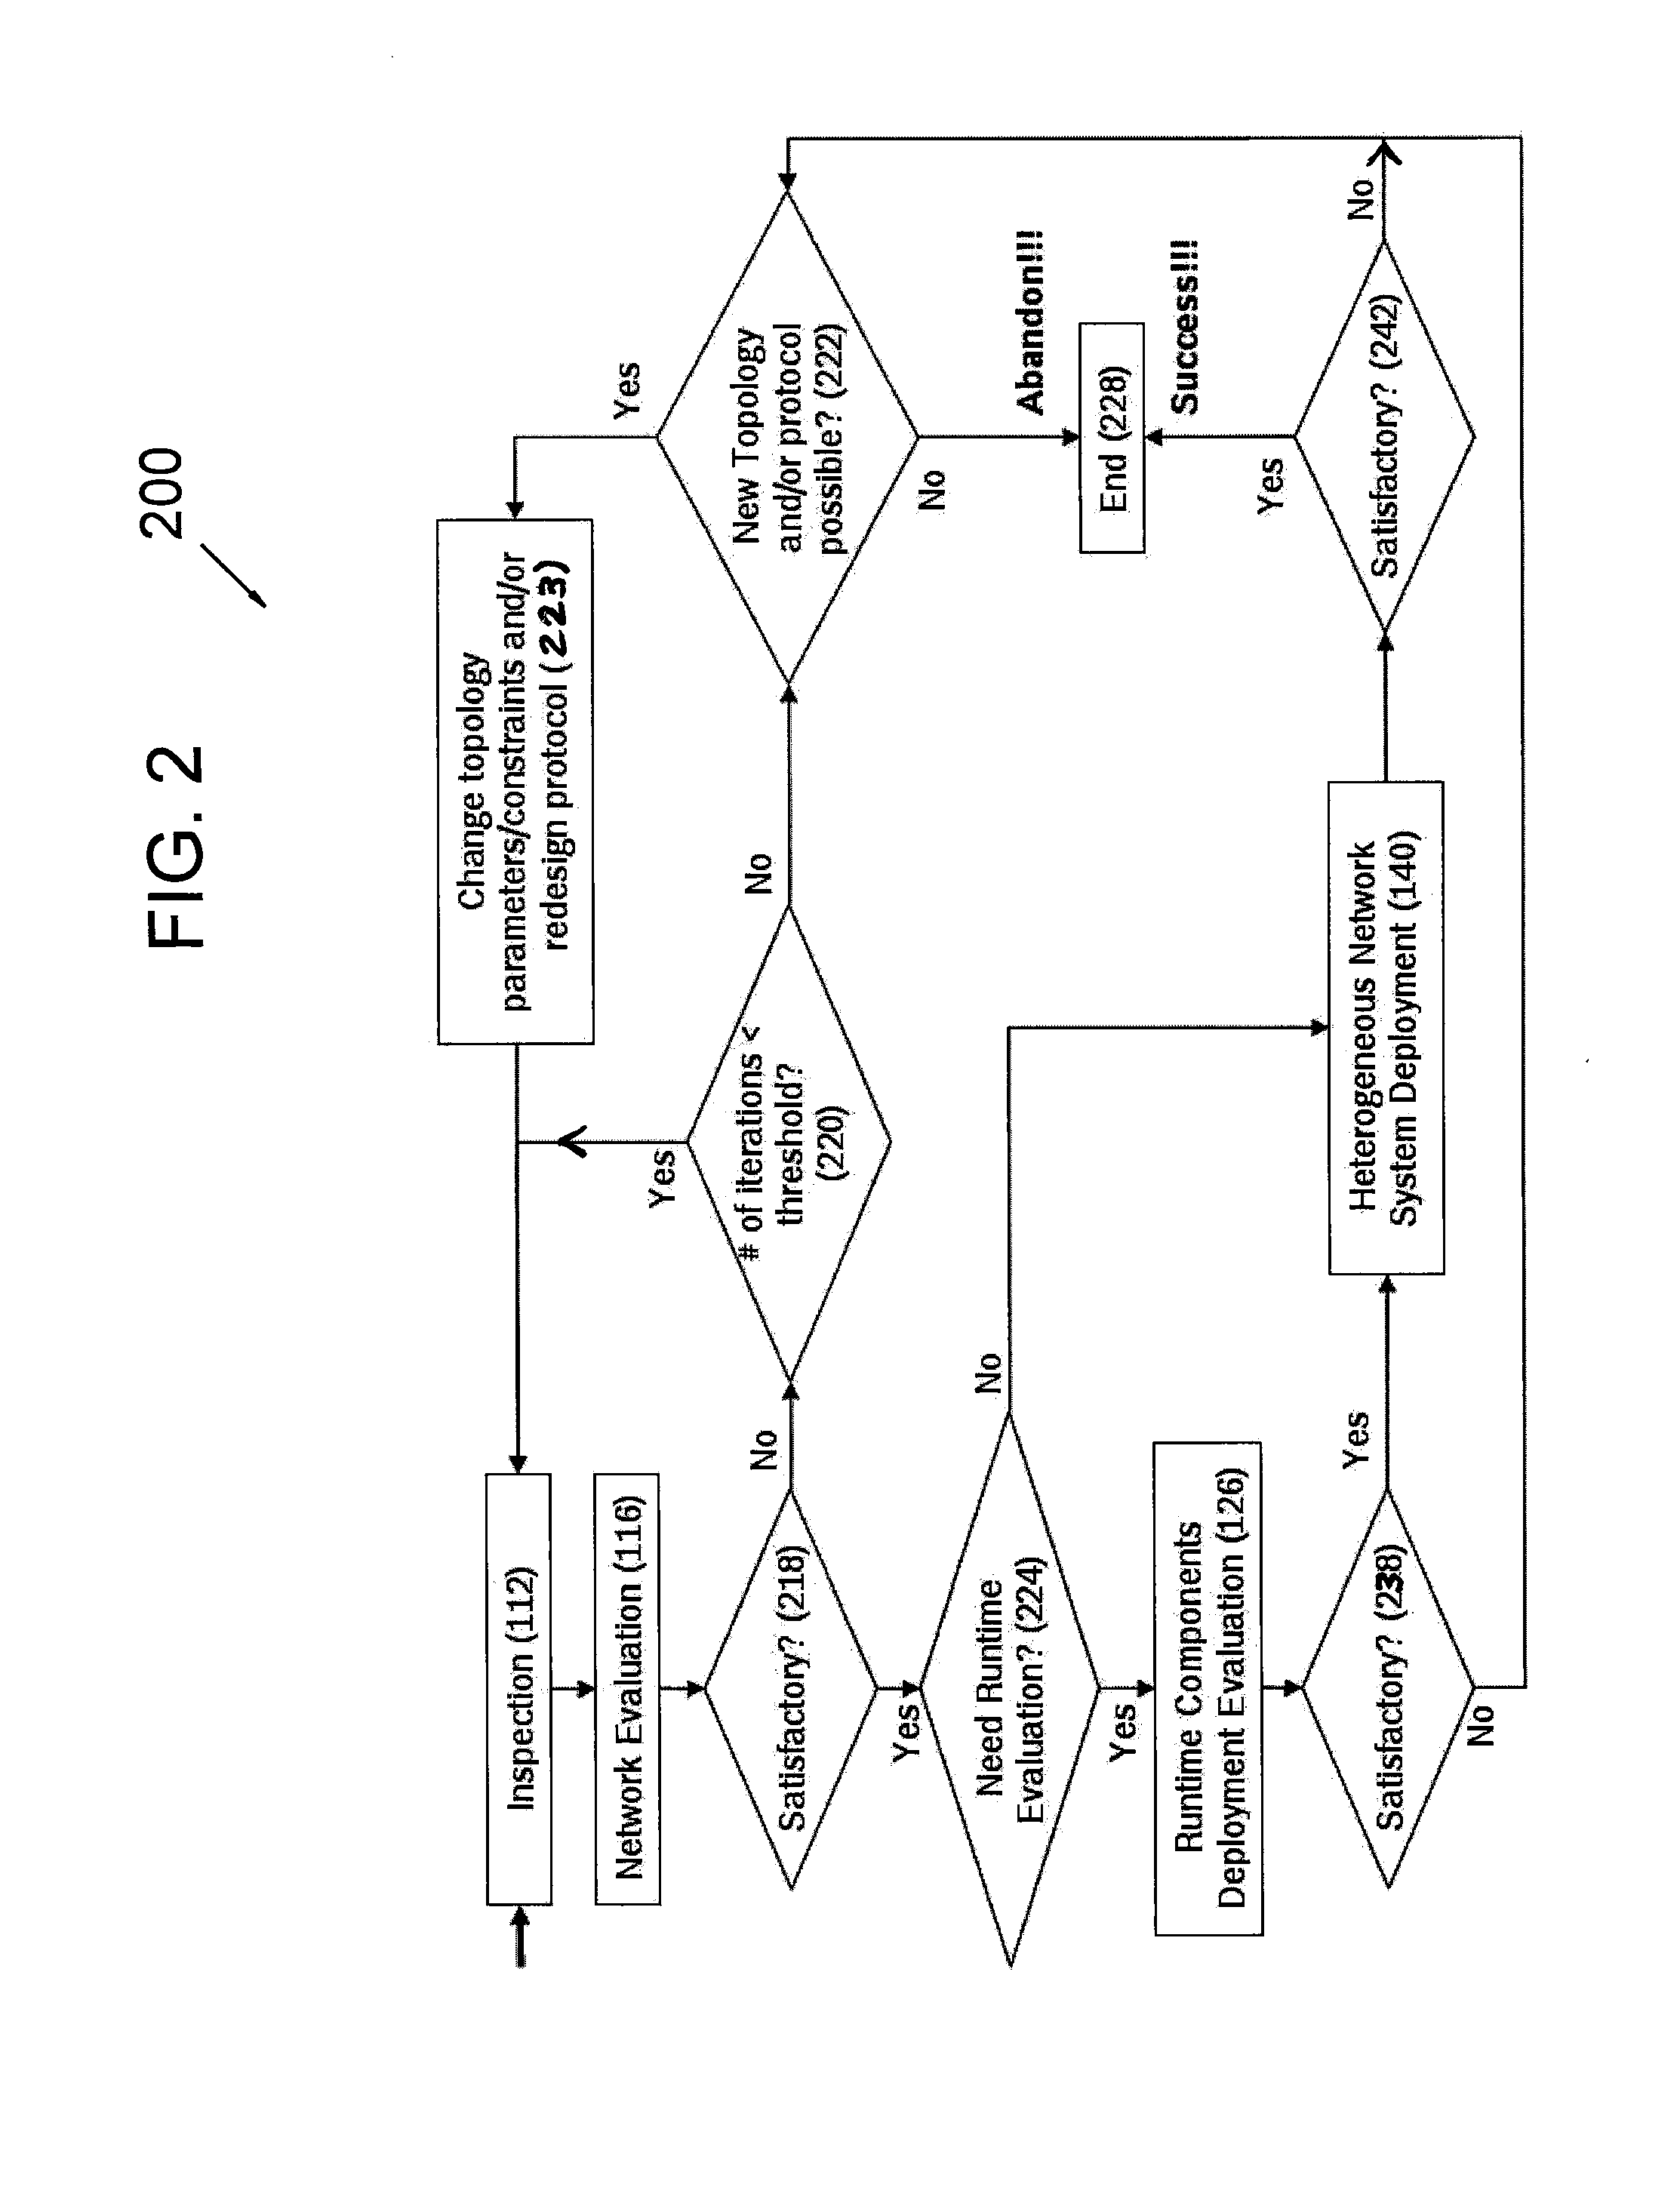 Method and system for deploying and evaluating networks in indoor environments